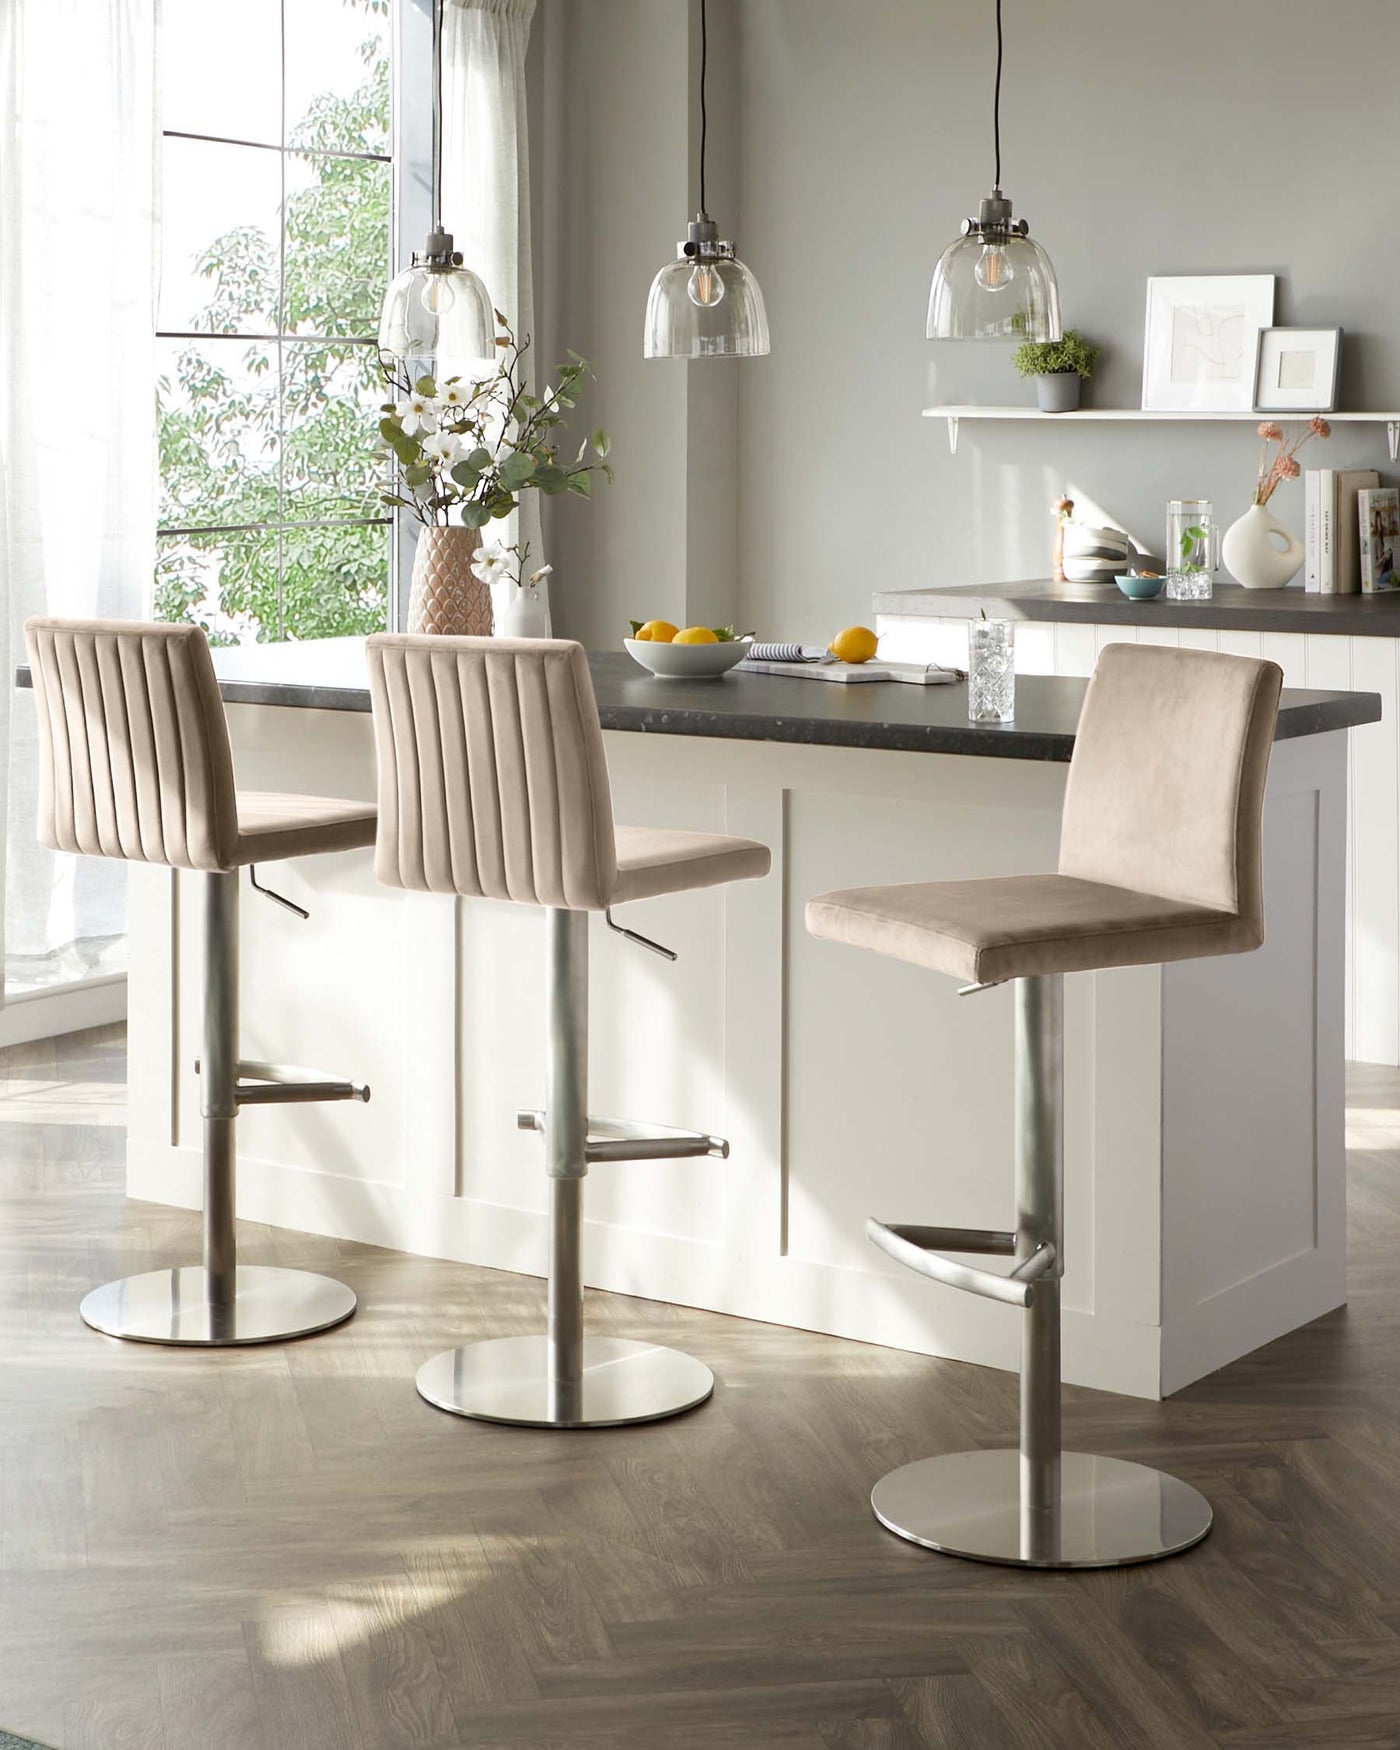 Modern adjustable bar stools with beige upholstered seats, vertical stitching on the backrest, and shiny chrome bases, placed by a kitchen island with a dark countertop.